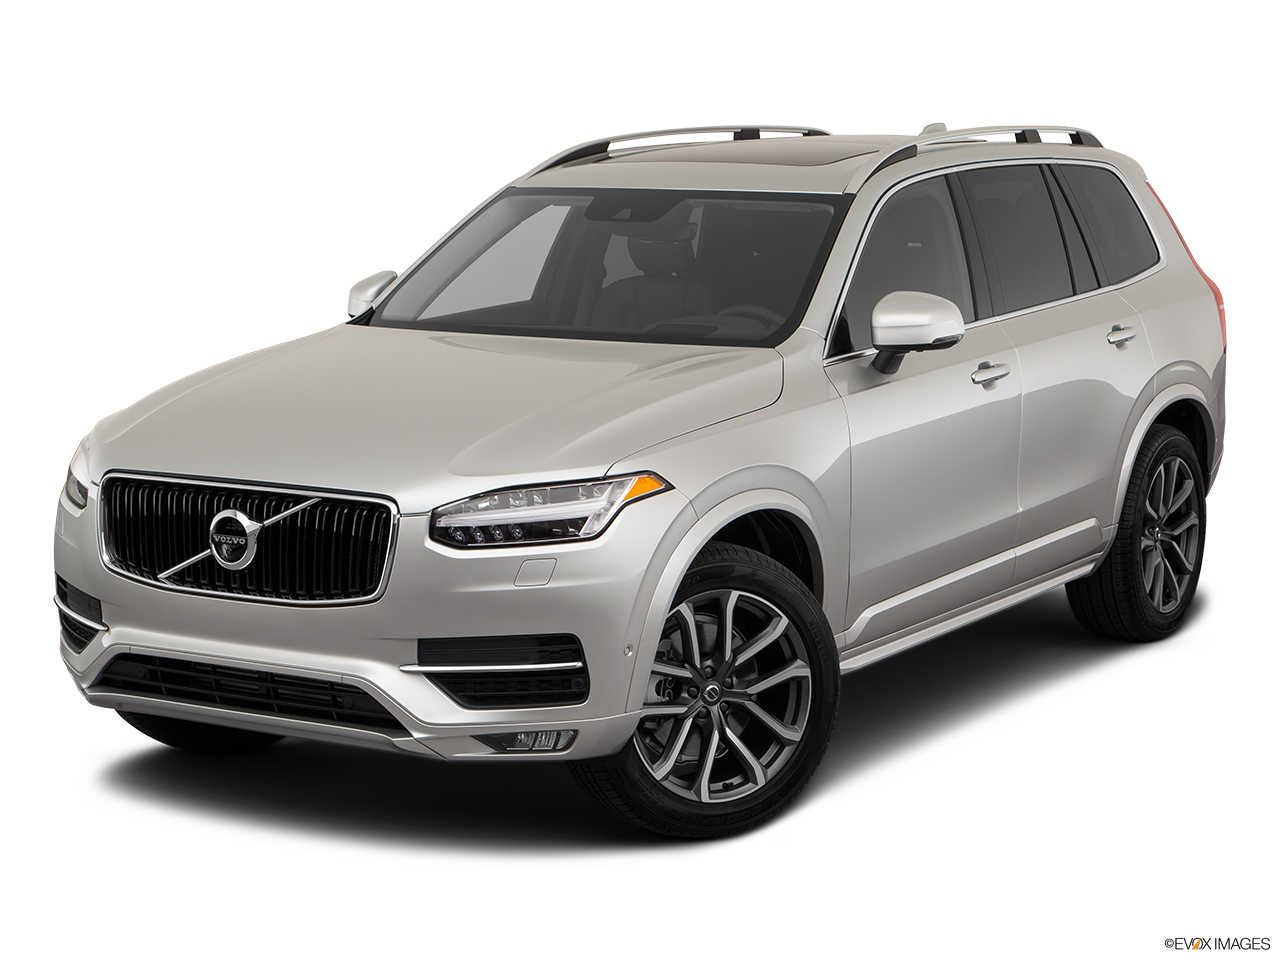 2019 Volvo XC90  T6 Momentum Front angle view. 